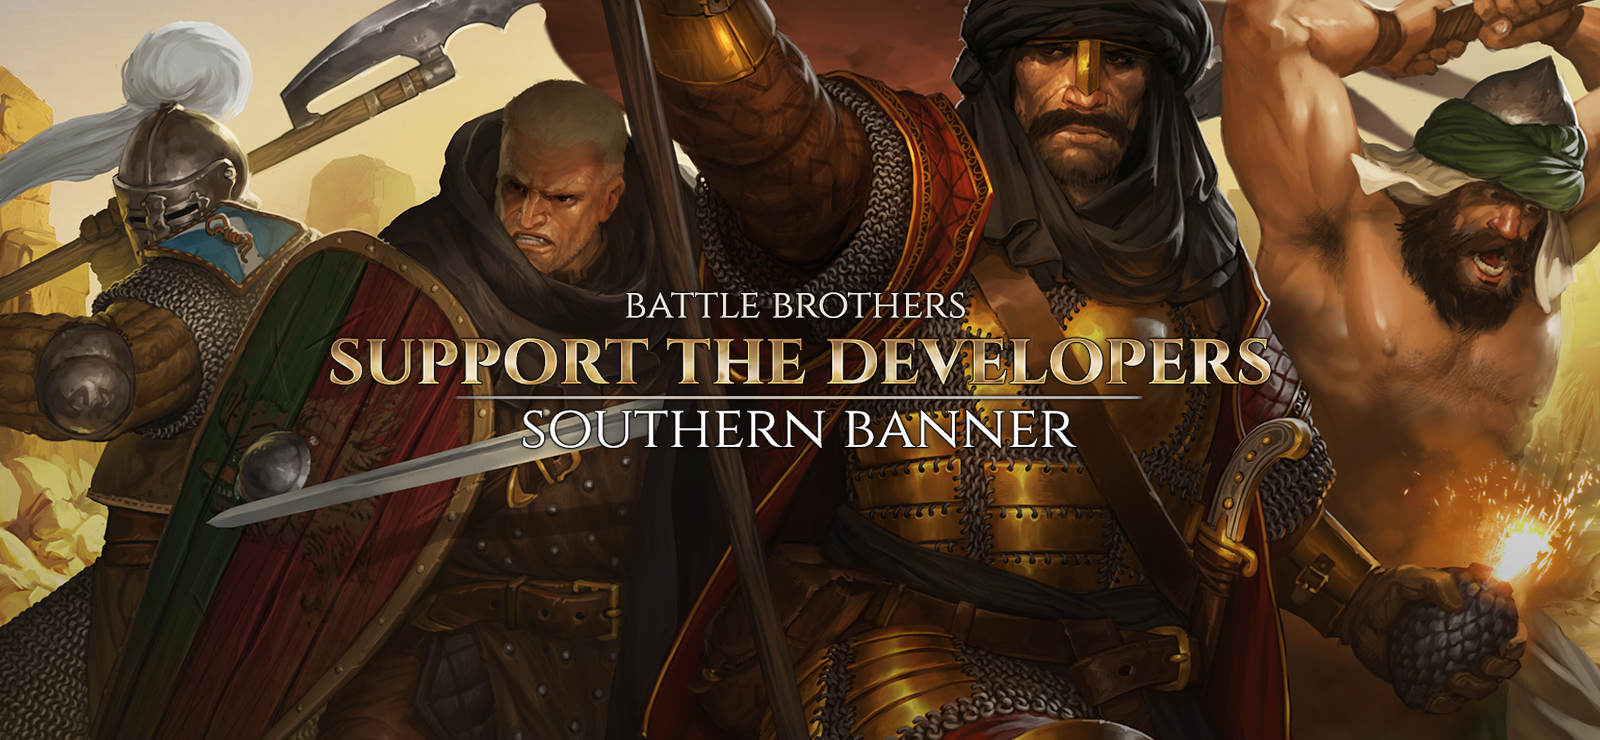 Battle Brothers - Support The Developers & Southern Banner